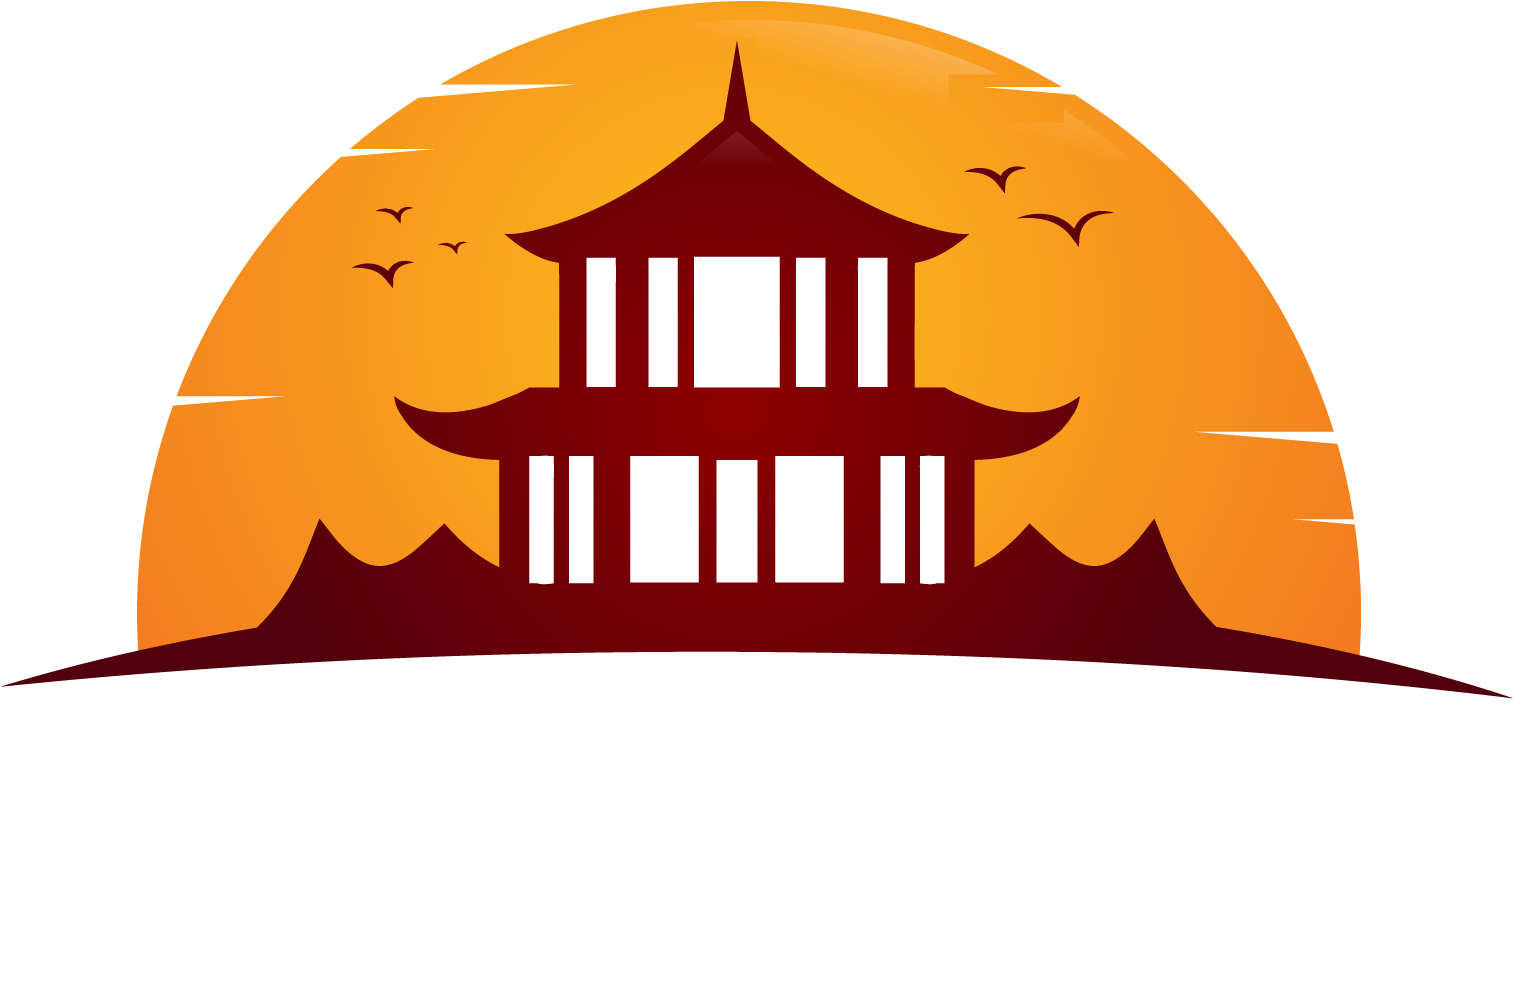 Our Food - Ming Palace (1550x1013)